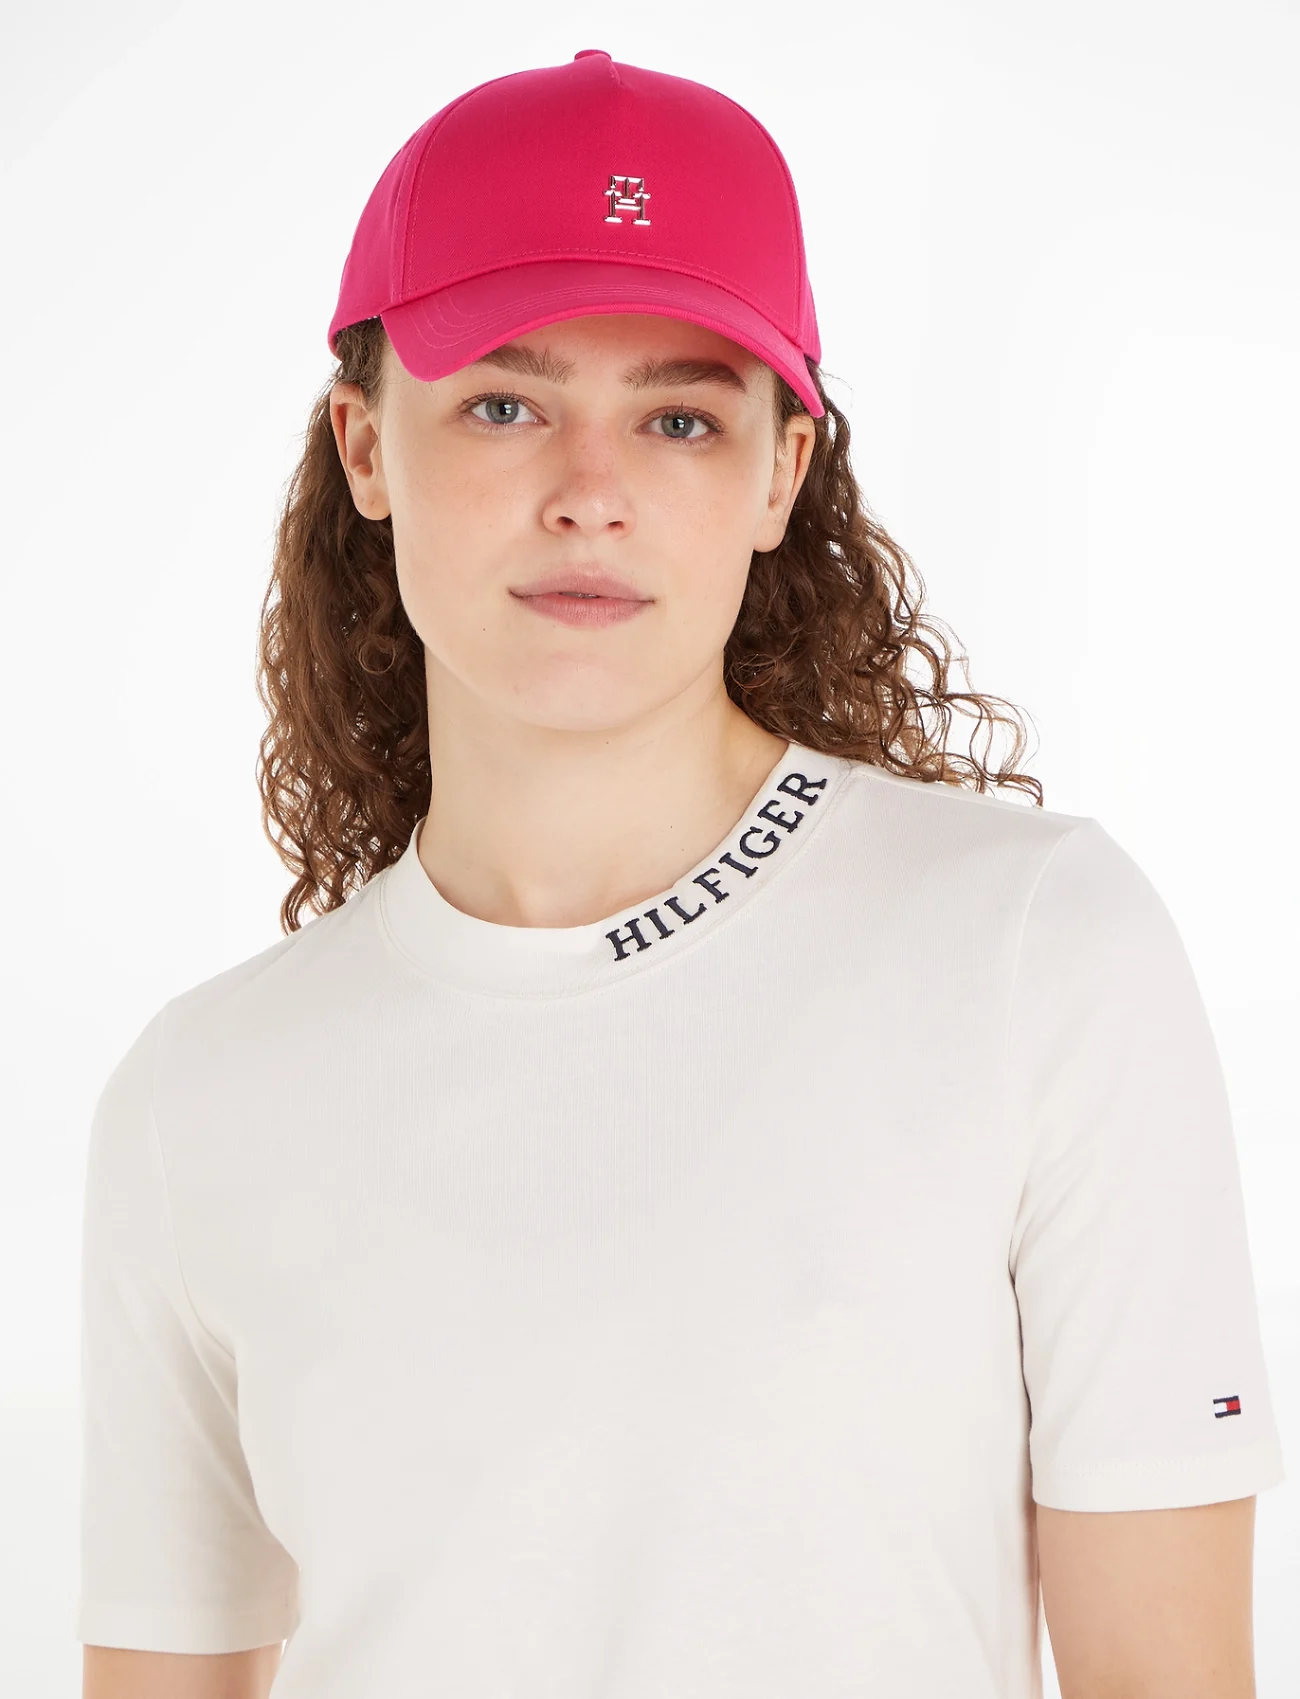 Tommy Hilfiger - TH CONTEMPORARY CAP - kasketter & caps - bright cerise pink - 1